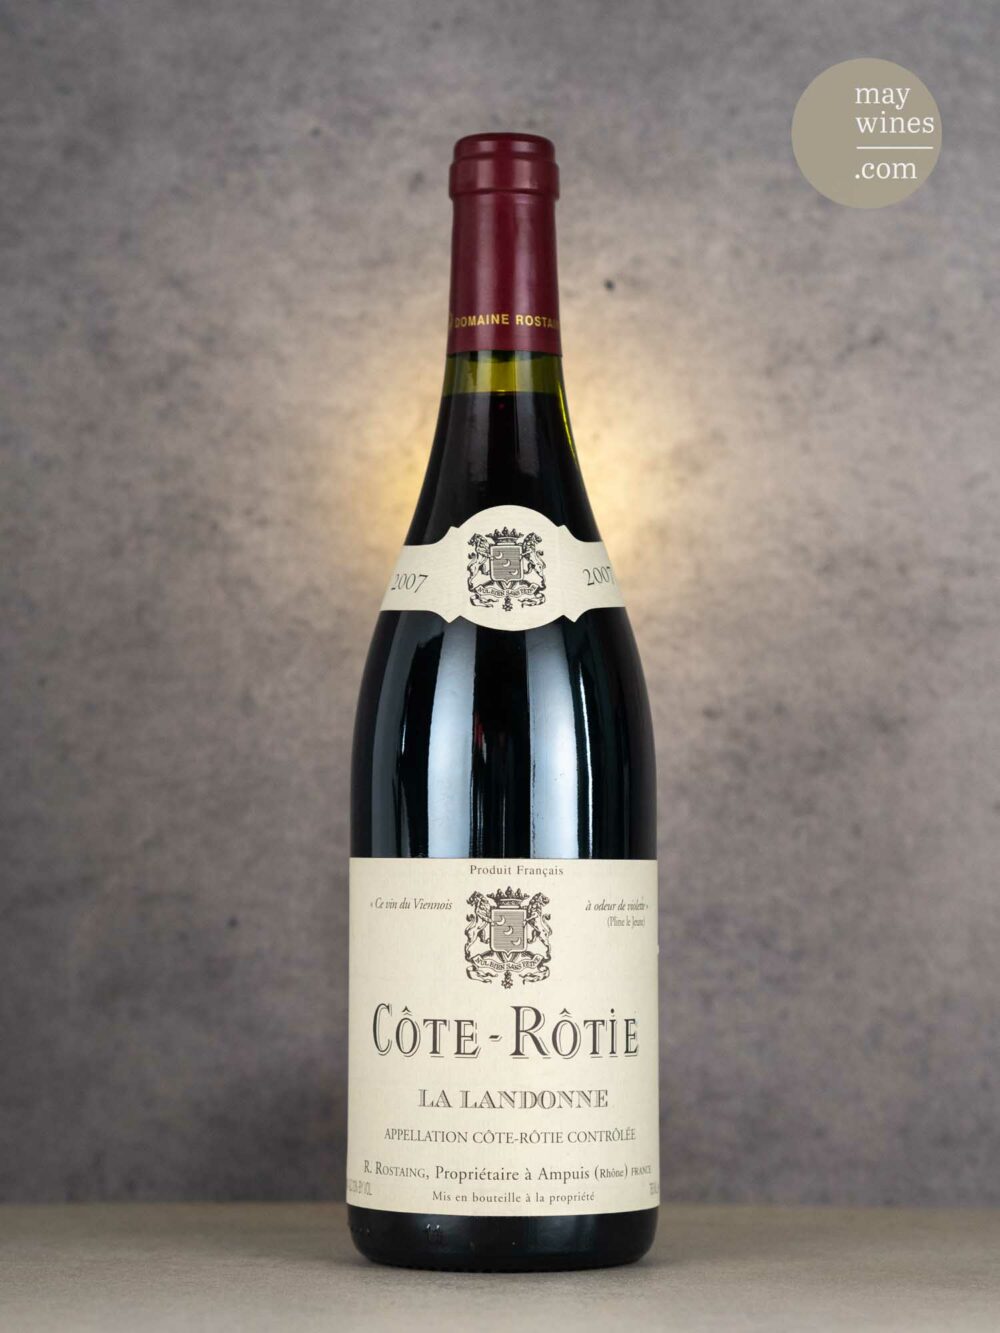 May Wines – Rotwein – 2007 La Landonne - Domaine Rostaing